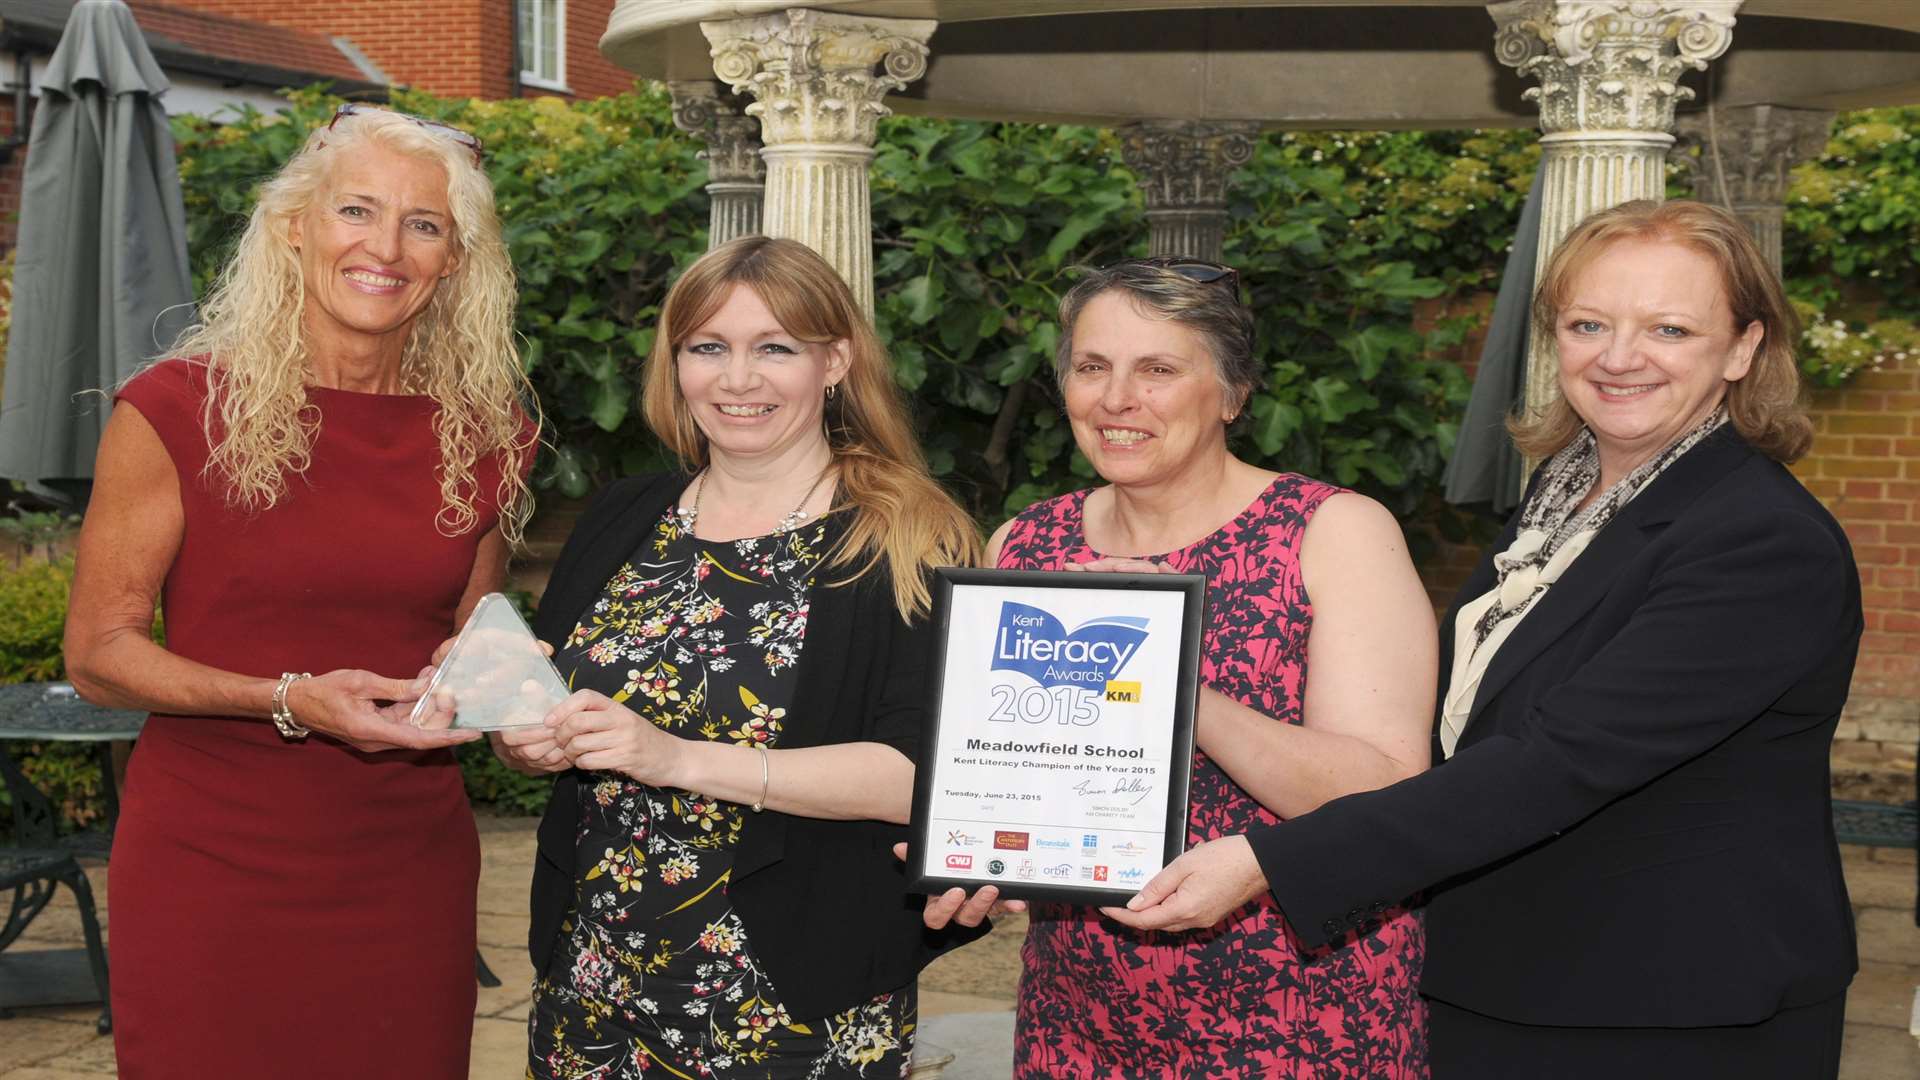 Helen Newman of Meadowfield School (second left) and colleague collected Overall Kent Literacy Champion of the Year award presented by Mandy Holdstock (Hempstead House) and Gillian Cawley (KCC).